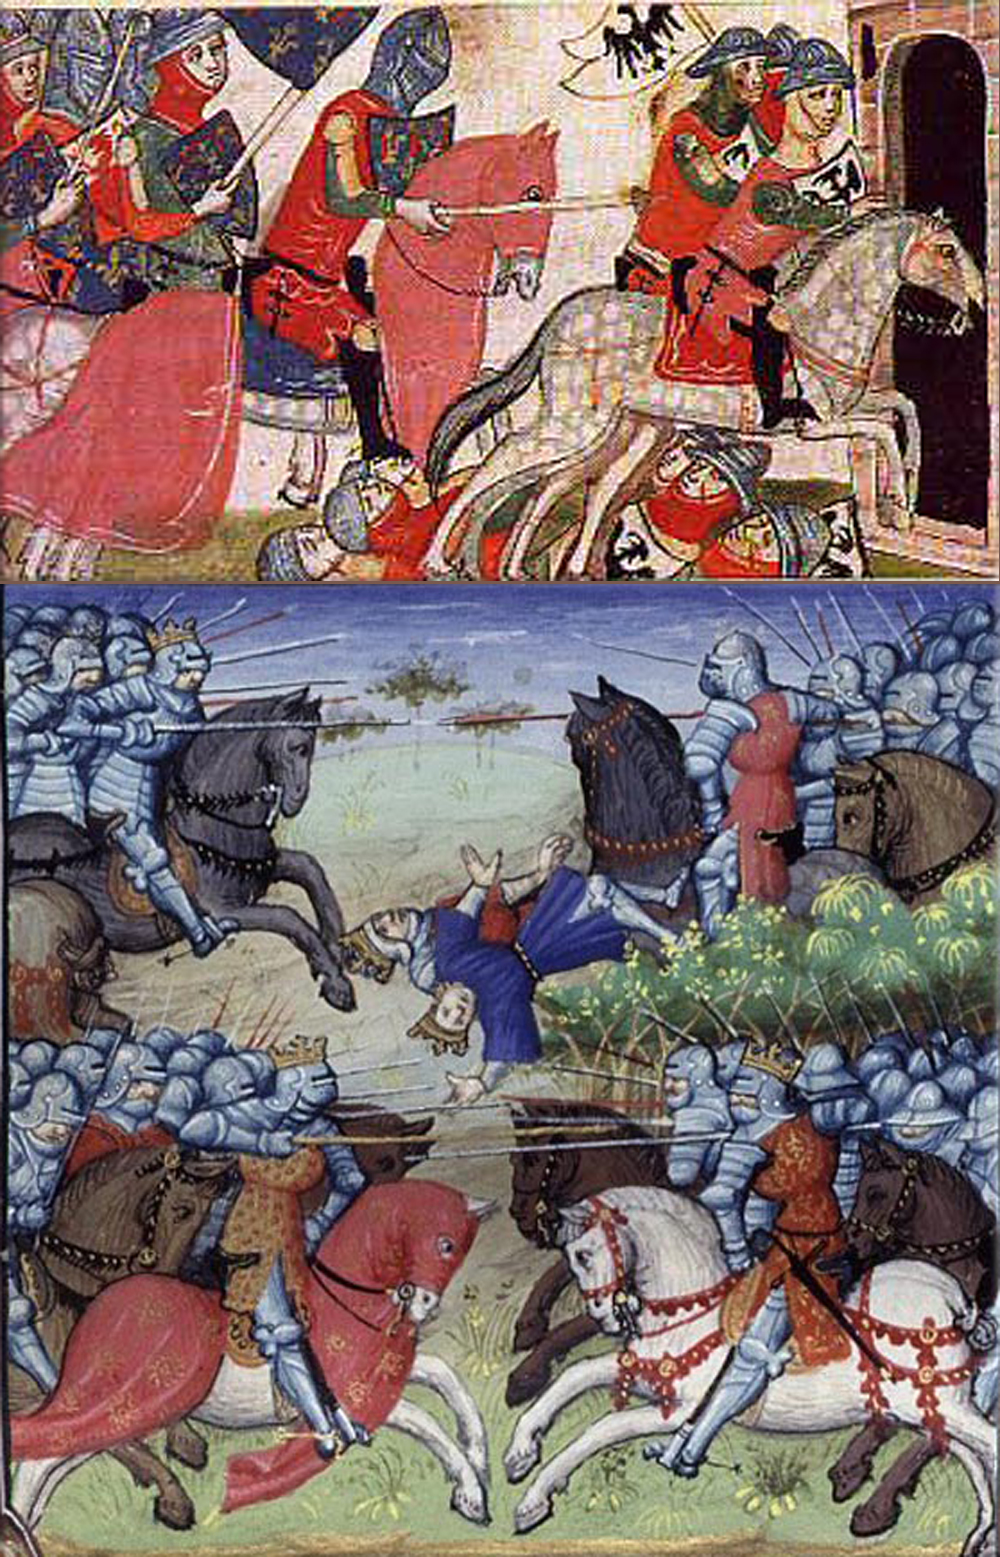  Battle of Benevento was fought near Benevento, in present-day Southern Italy, on February 26, 1266, between the troops of Charles of Anjou and Manfred of Sicily - Manfred's defeat and death resulted in the capture of the Kingdom of Sicily by Charles